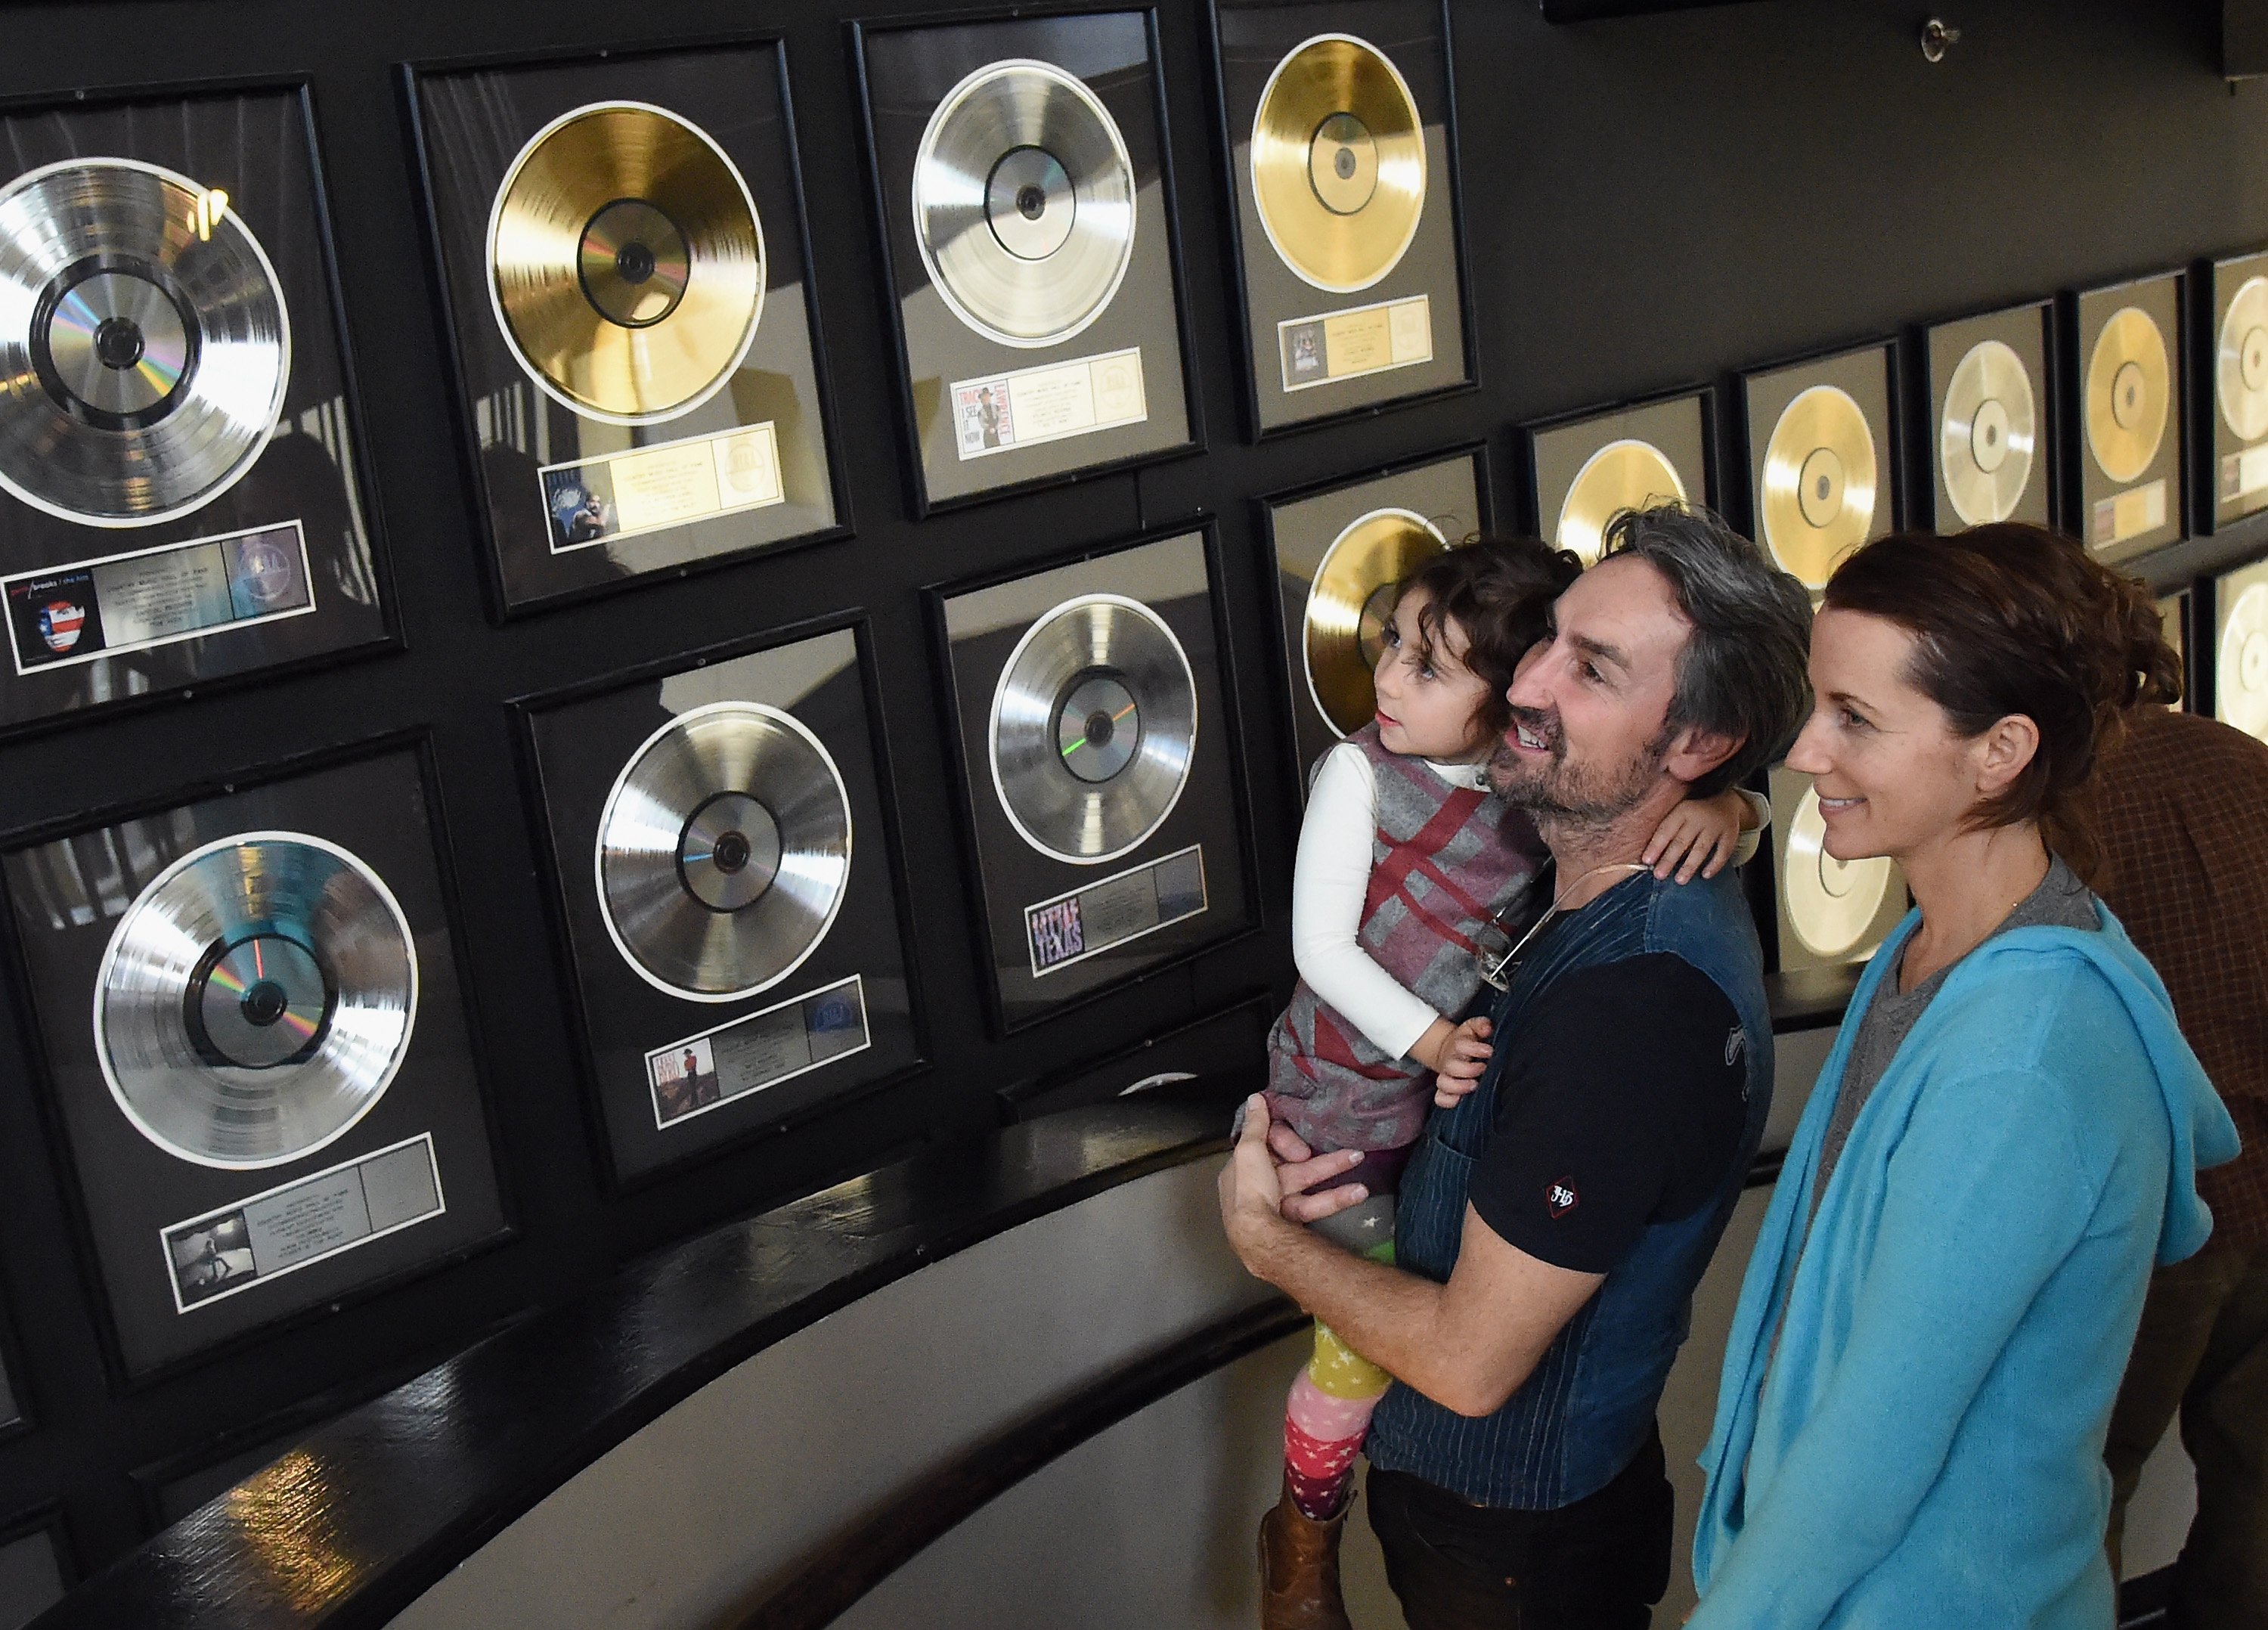 TV Reality show "American Pickers" star Mike Wolfe & Family Visit The Country Music Hall Of Fame And Museum on December 13, 2015, in Nashville, Tennessee. I Source: Getty Images